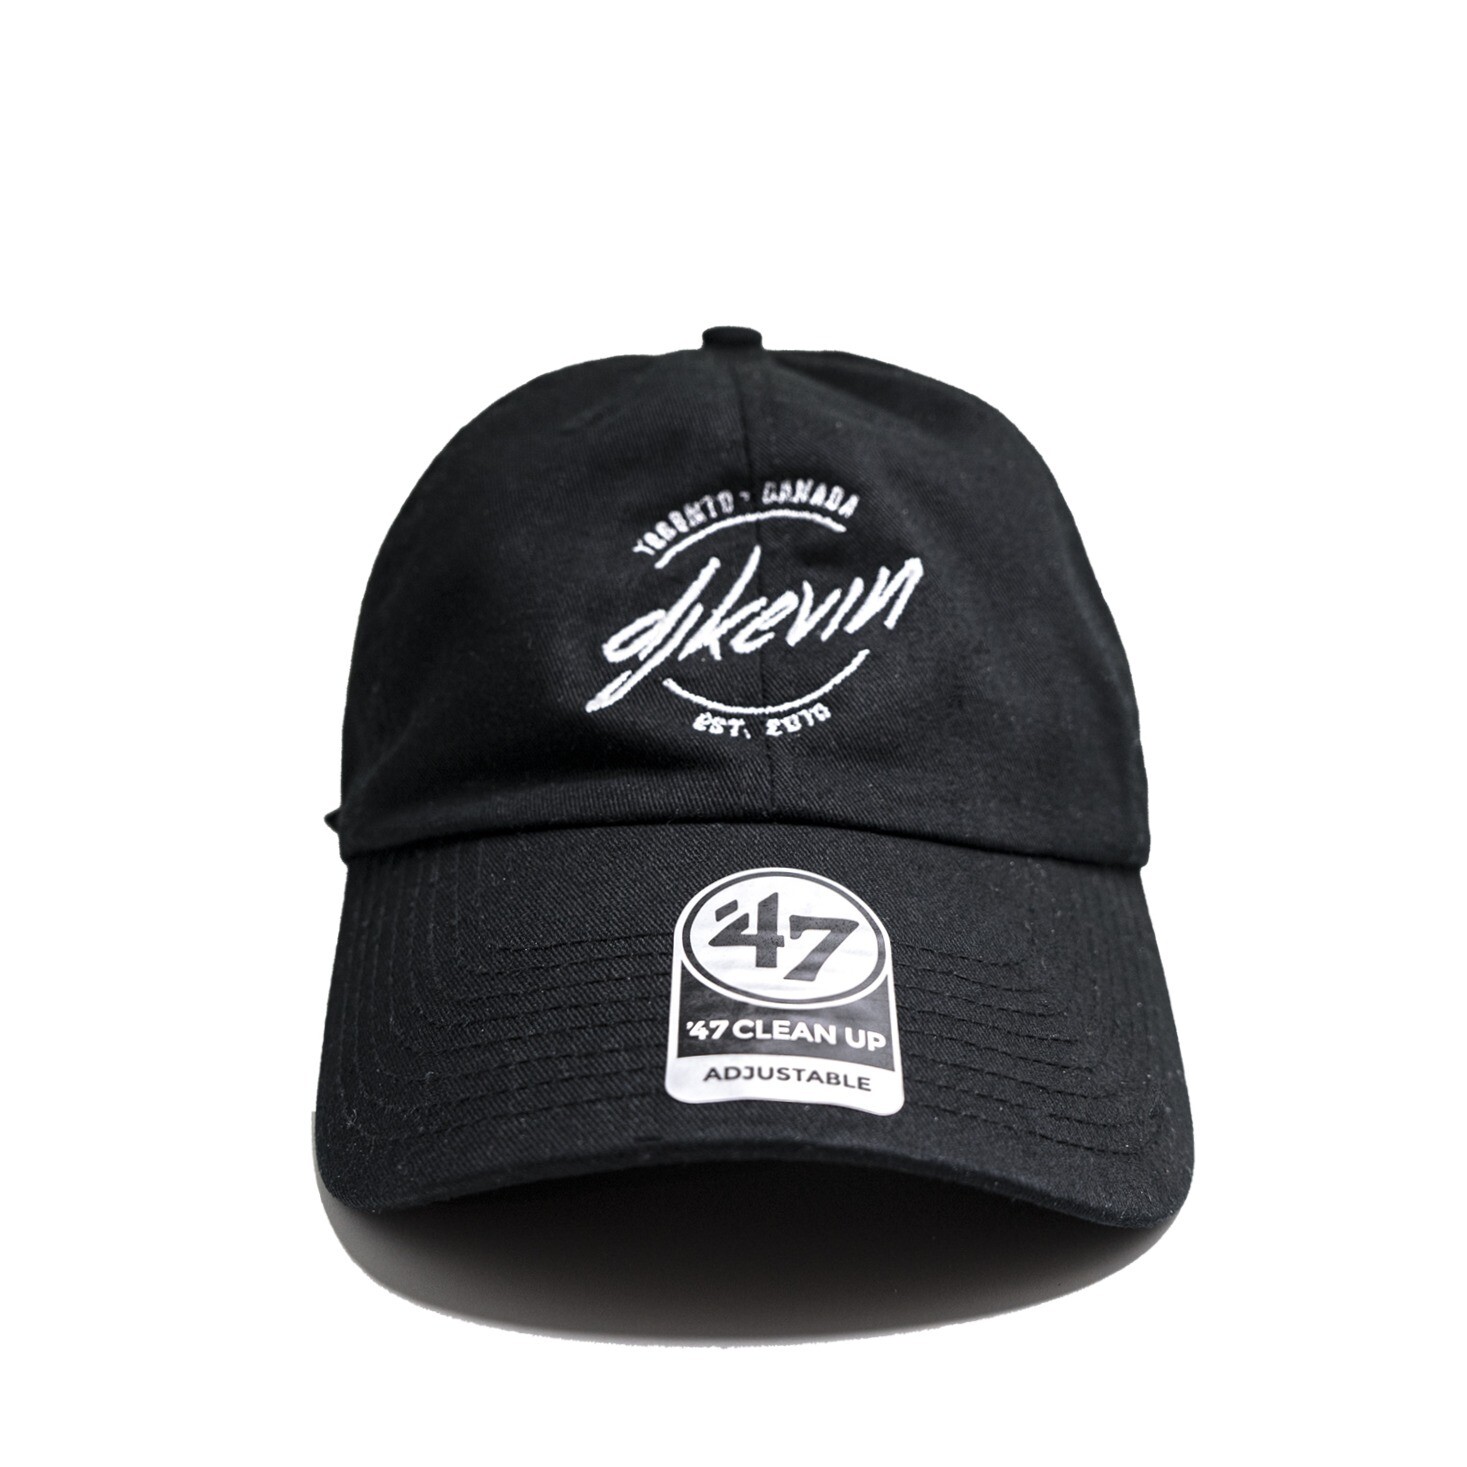 DJ Kevin Black Classic Embroidered Hat